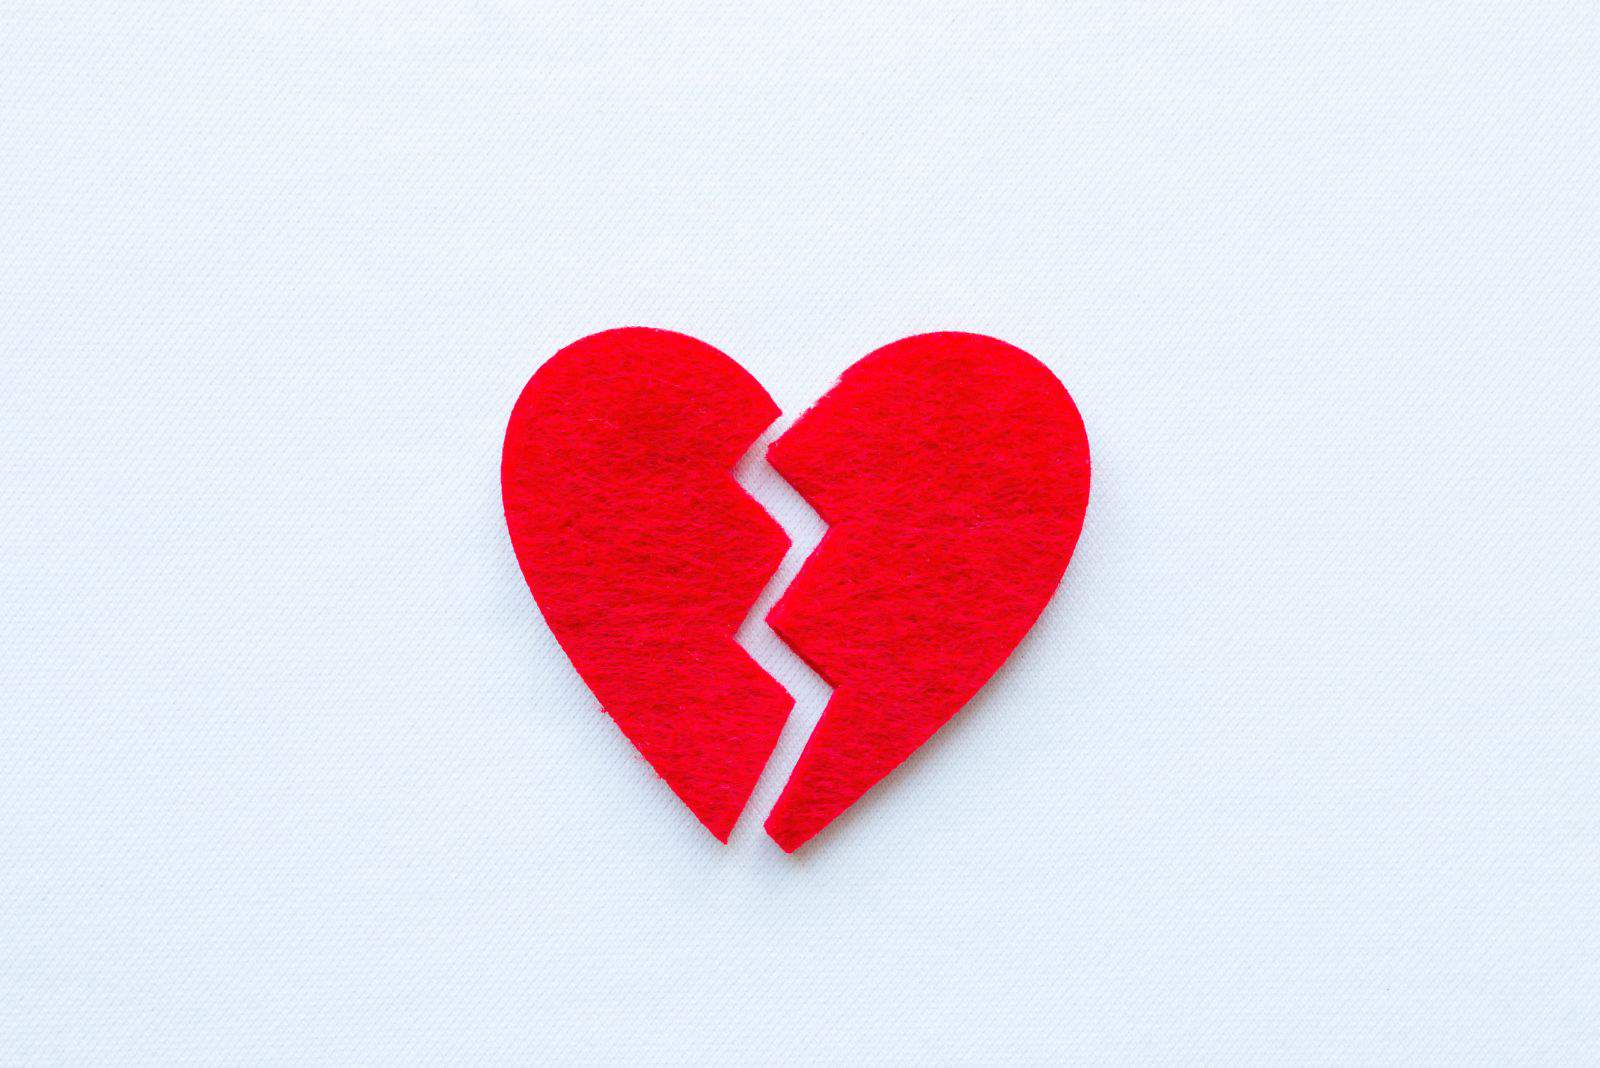 Sad Love Quotes To Help You Cope With Heartbreak - THE ROCKLE